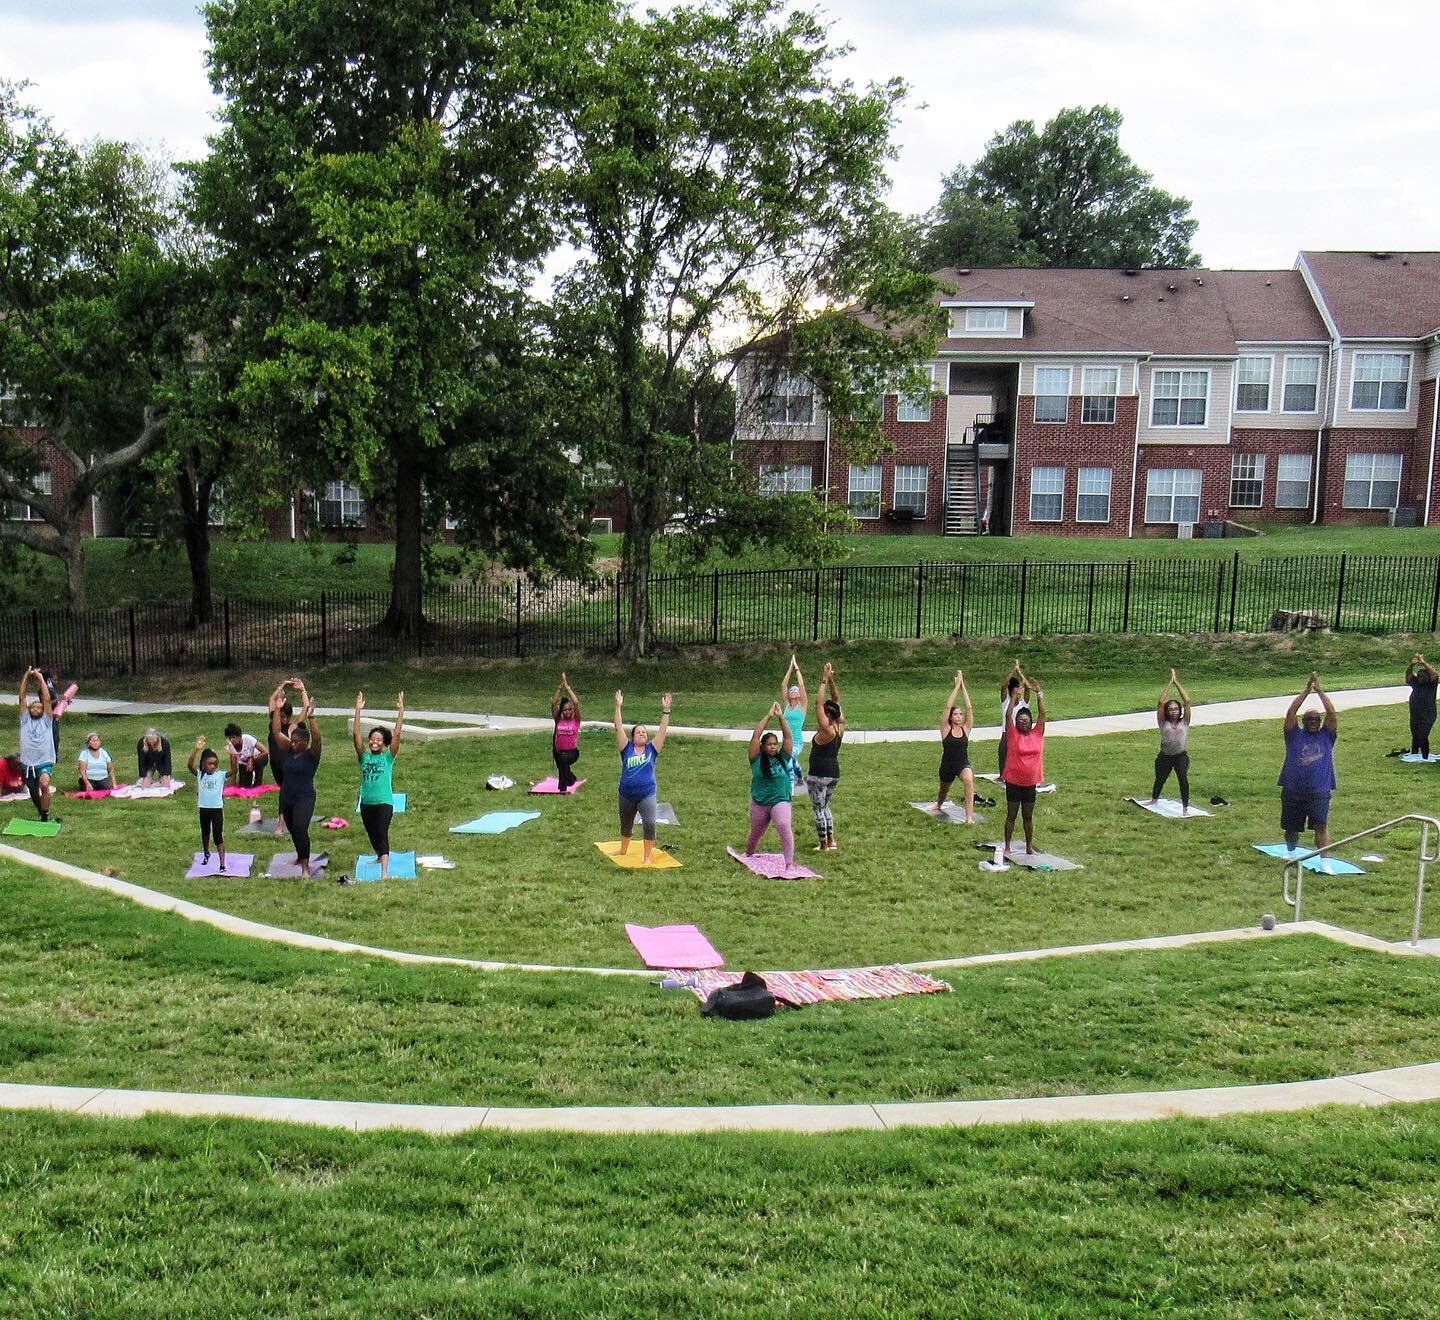 Join us Wednesday night at 5:30pm for another FREE Yoga in the Park session at Renaissance park (1467 S Mississippi Blvd)! A perfect opportunity to get some fresh air, connect with community, and feel refreshed! 
.
.
Don&rsquo;t have yoga mat? Don&rs